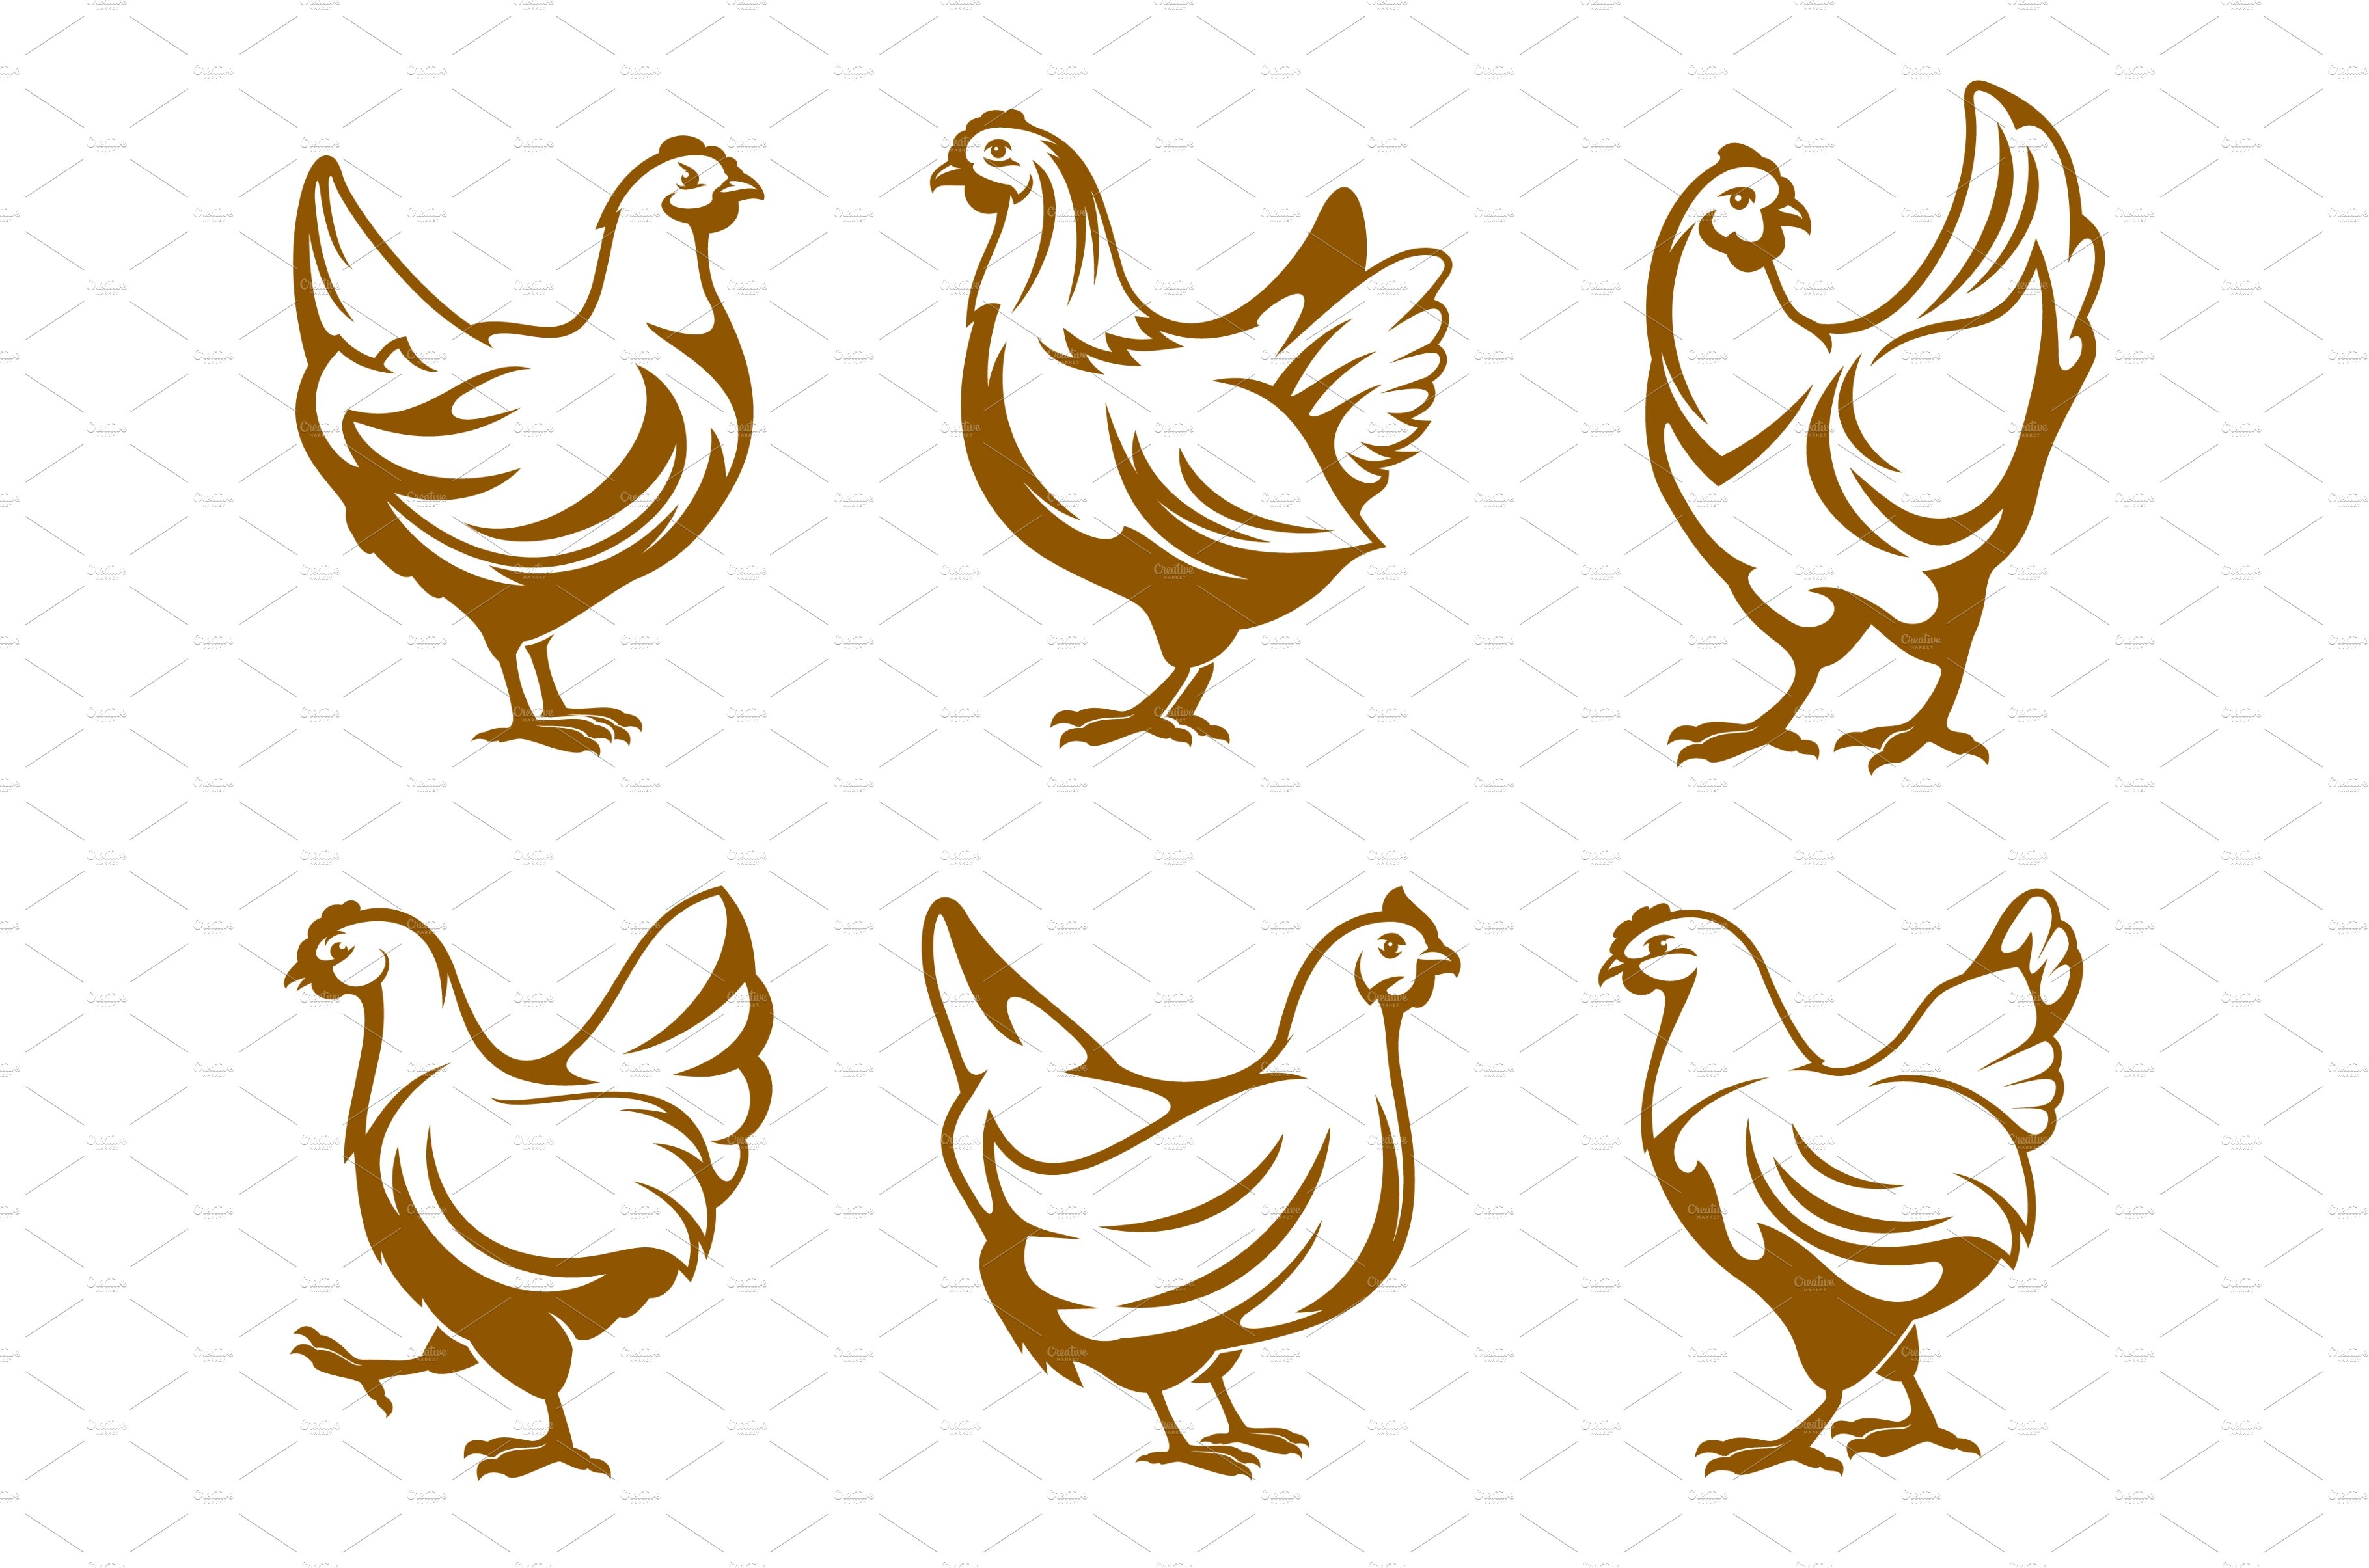 Hen icons, chicken farm and poultry cover image.